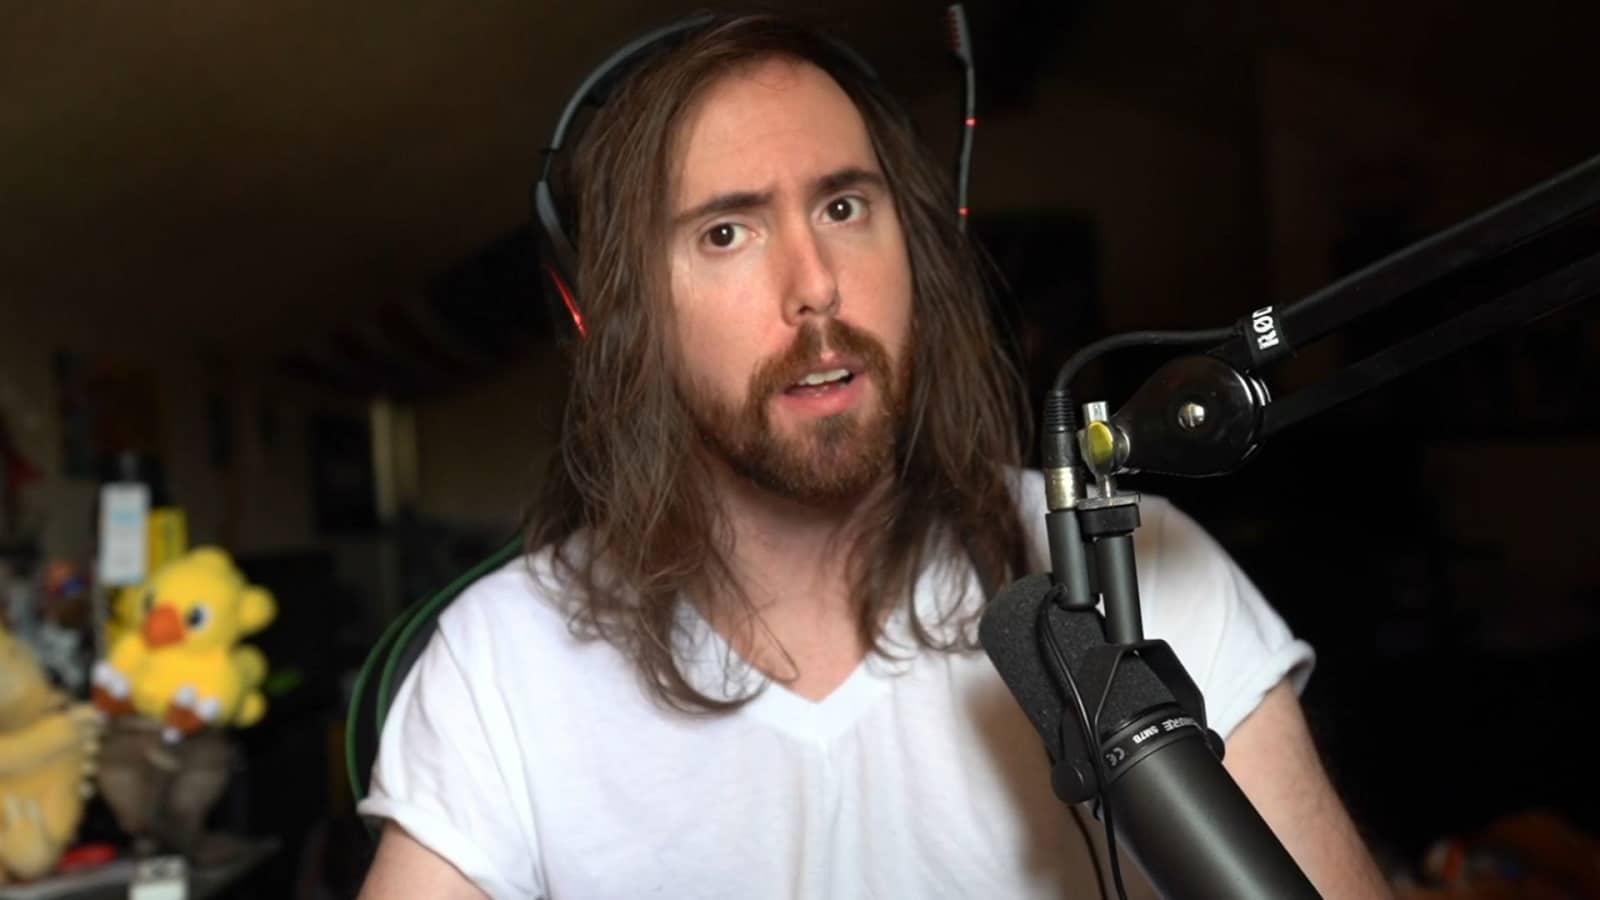 Asmongold streaming on Twitch